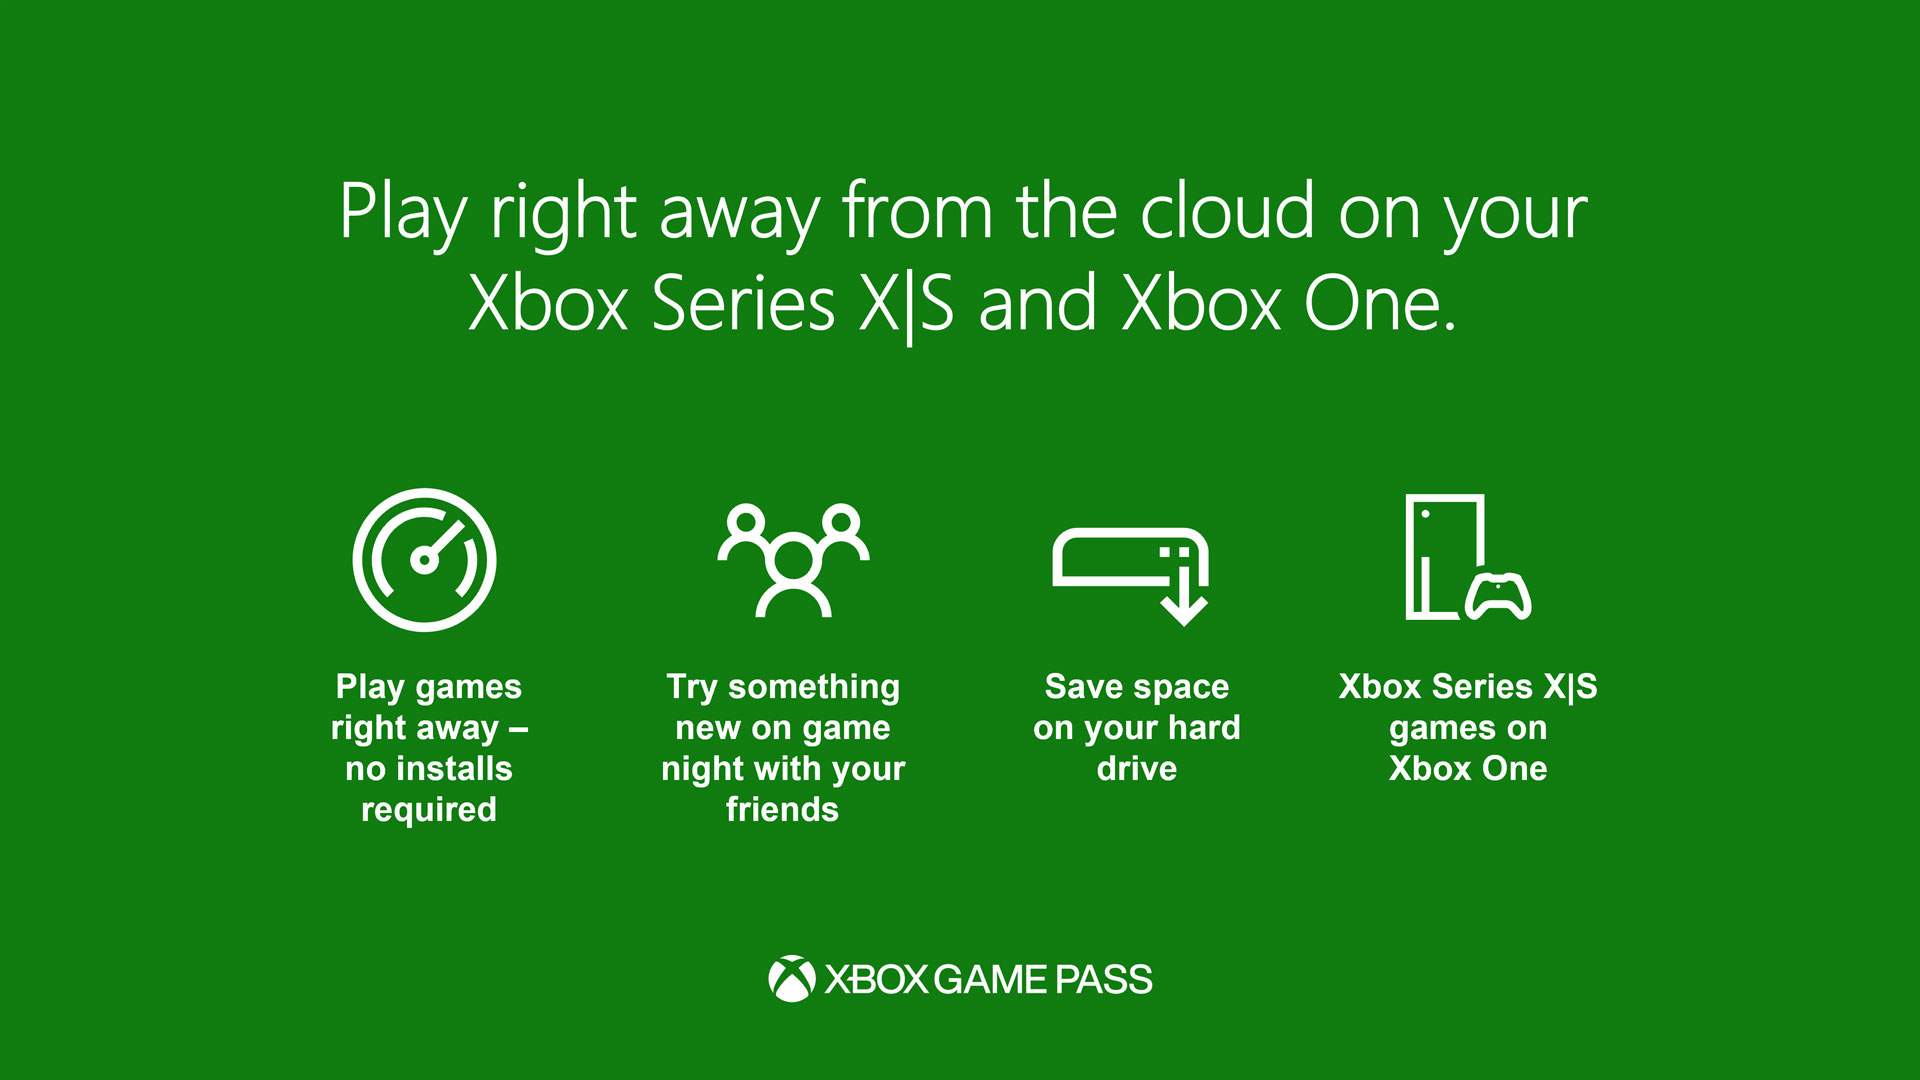 Cloud gaming is coming to Xbox consoles later this year